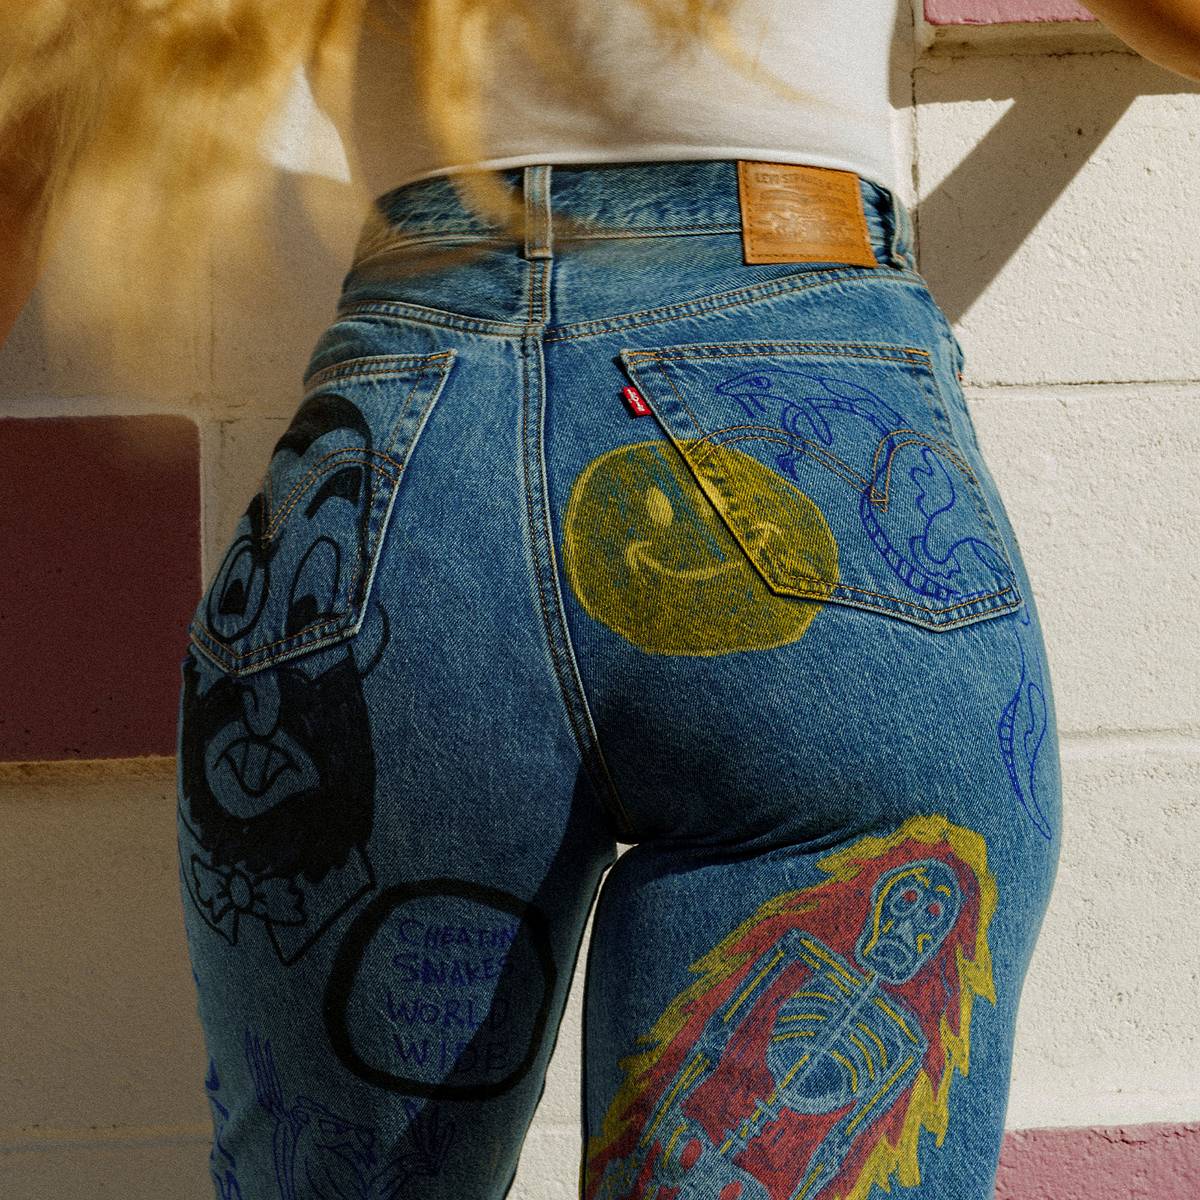 Image of model's backside wearing jeans with hand made doodles/illustrations